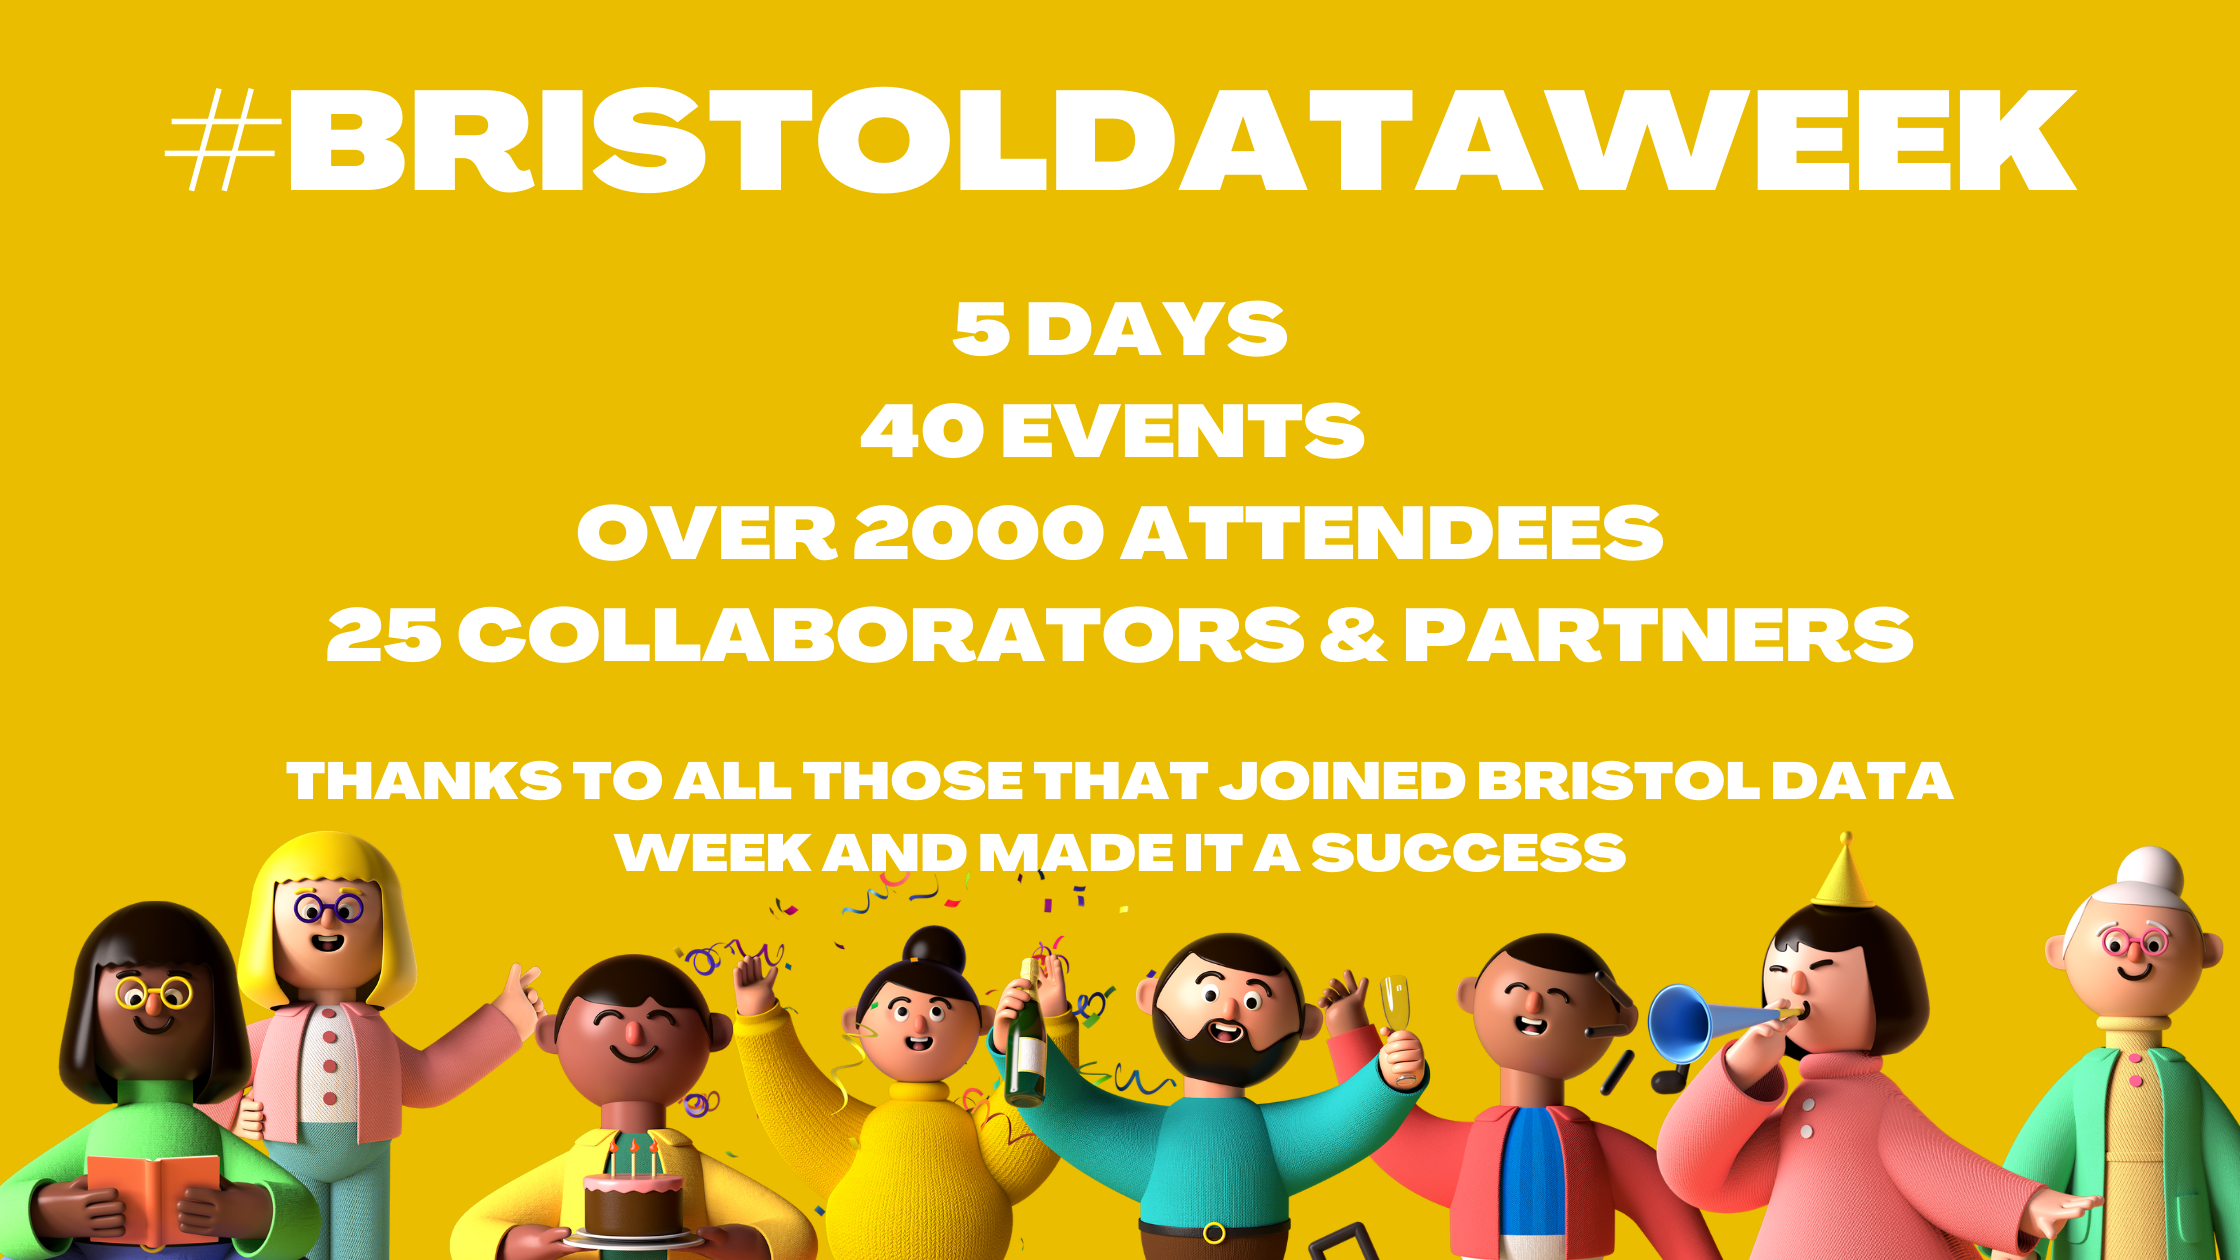 #BristolDataWeek; 5 Days; 40 events; Over 2000 Attendees; 25 Collaborators & Partners; Thanks to all those that joined Bristol Data Week and made it a success